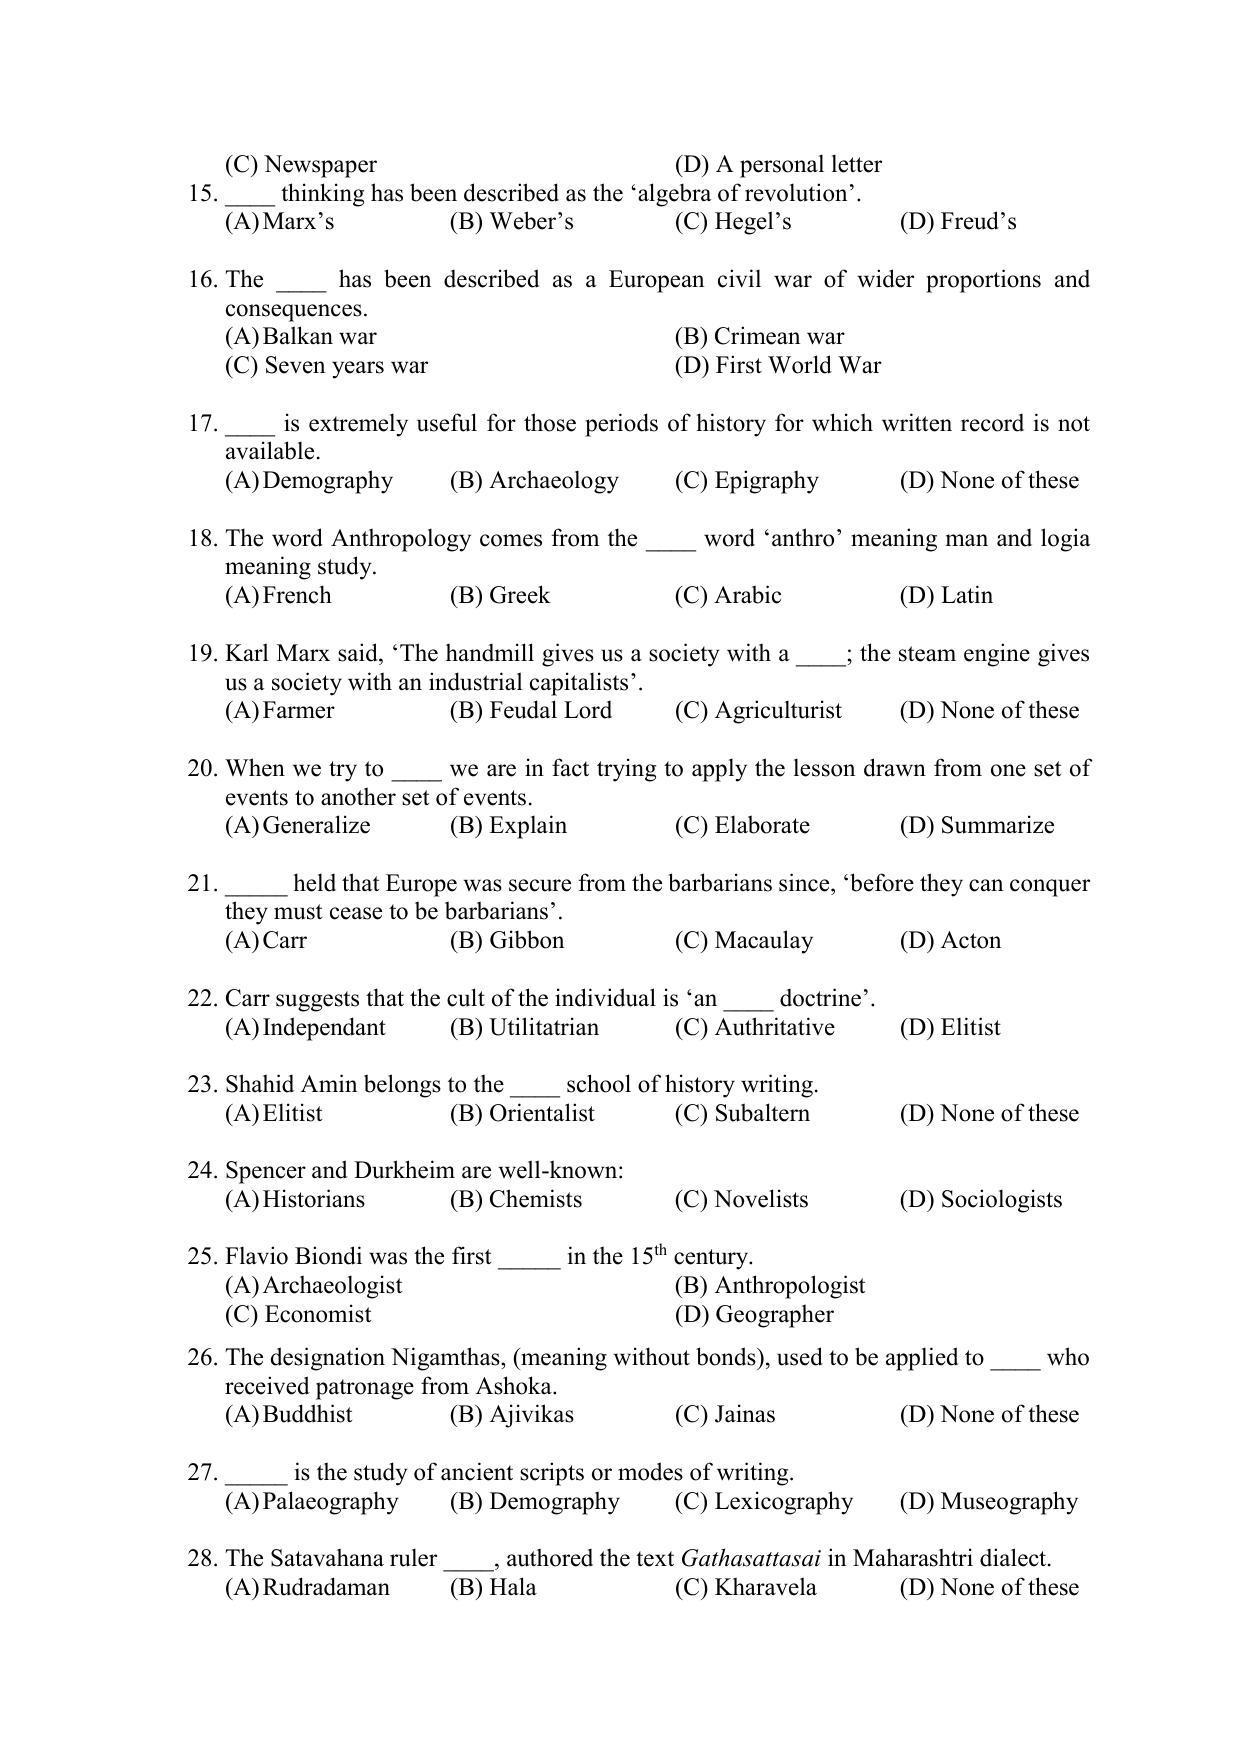 PU MPET Ancient Indian History & Archeology 2022 Question Papers - Page 19